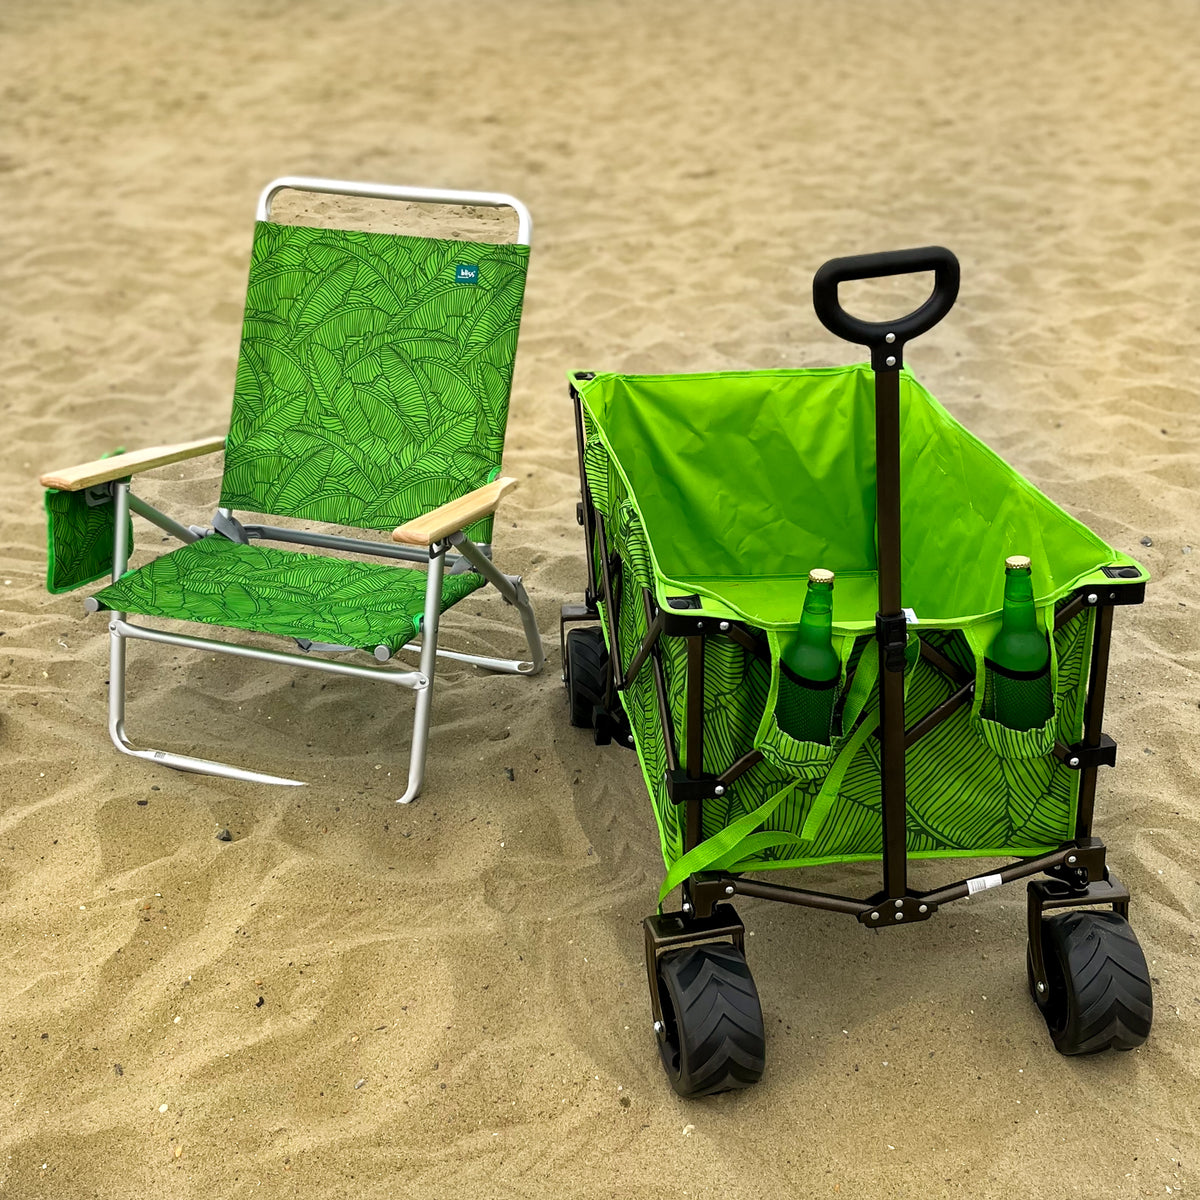 Green Banana Leaves Collapsible Beach Wagon with bottles in the cup holders, next to a matching beach chair.